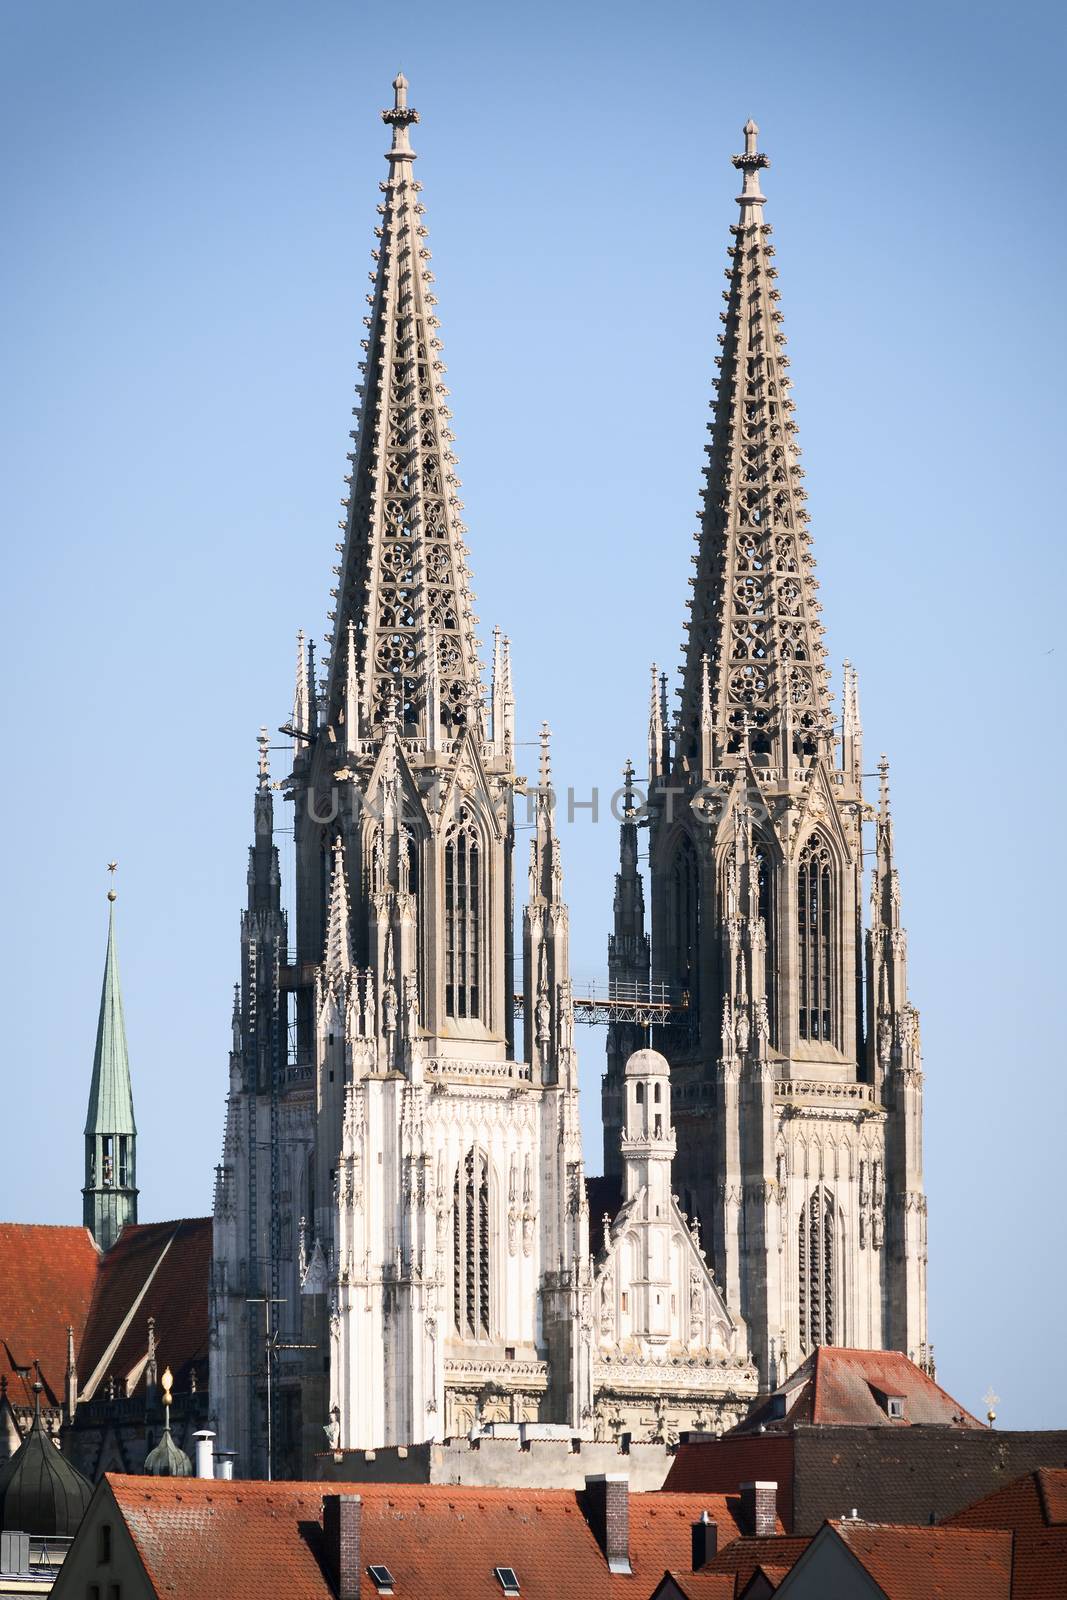 Image of the towers of cathedral in Regensburg, Bavaria, Germany